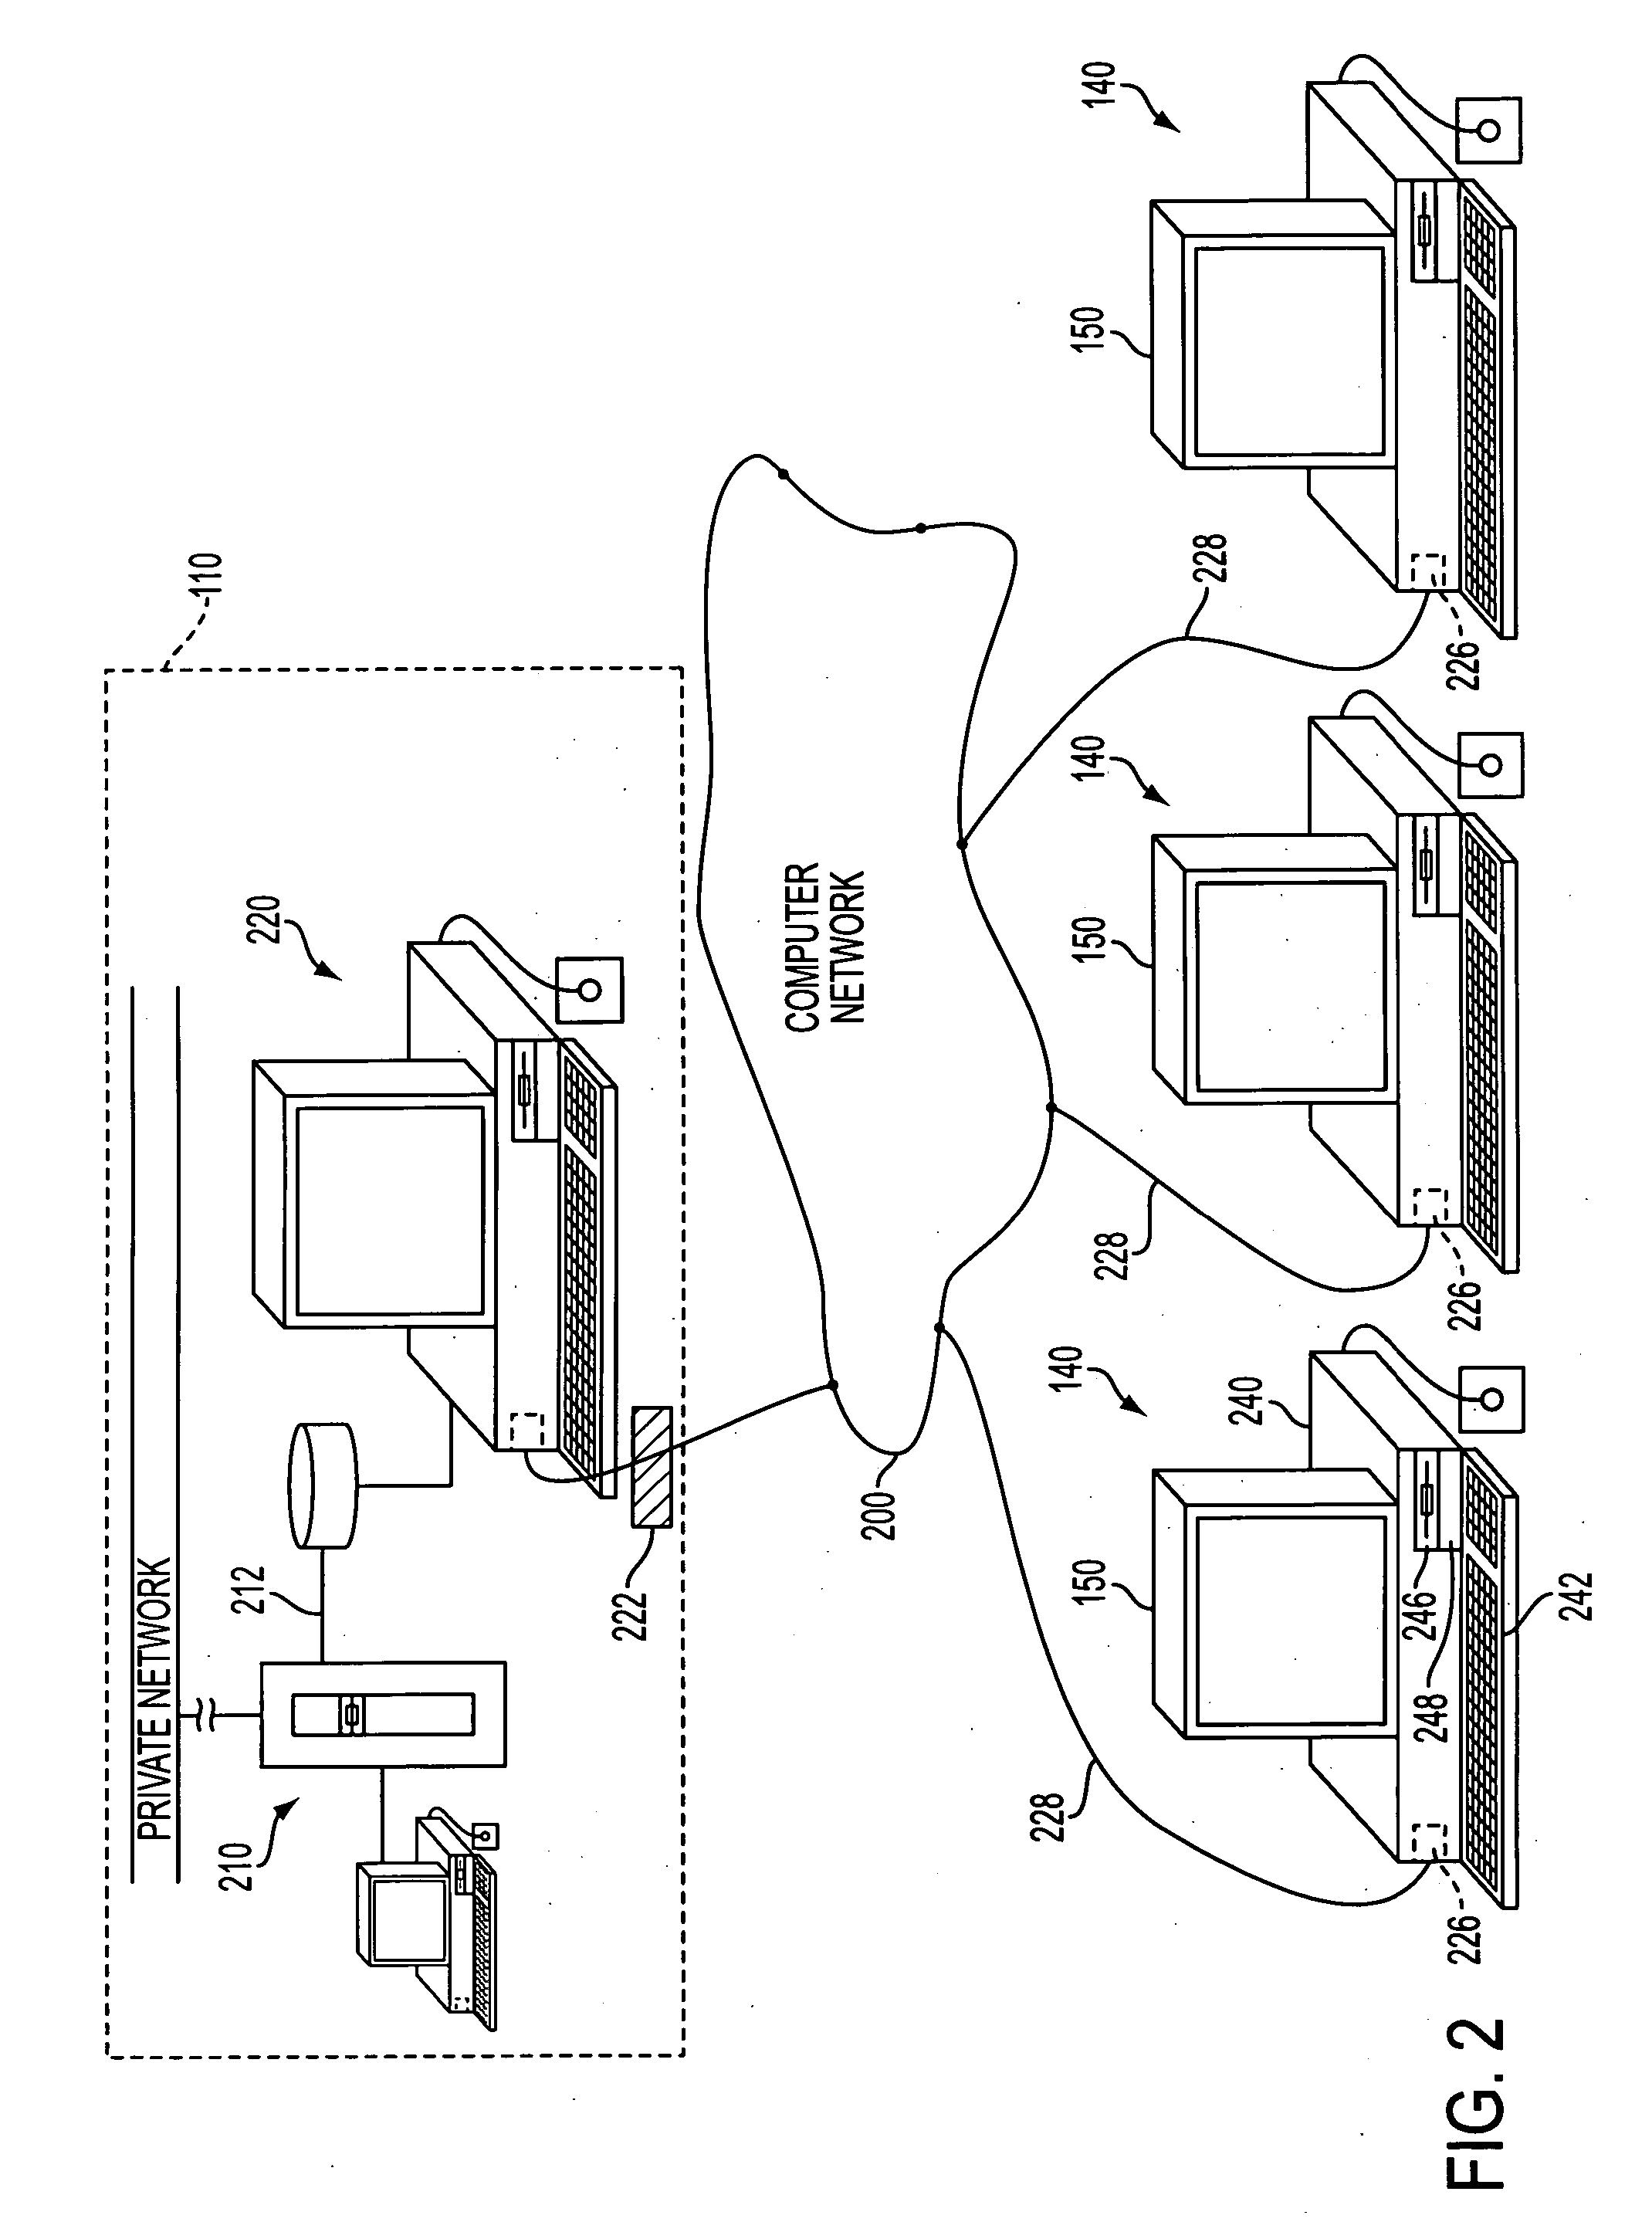 Puppetry based communication system, method and internet utility